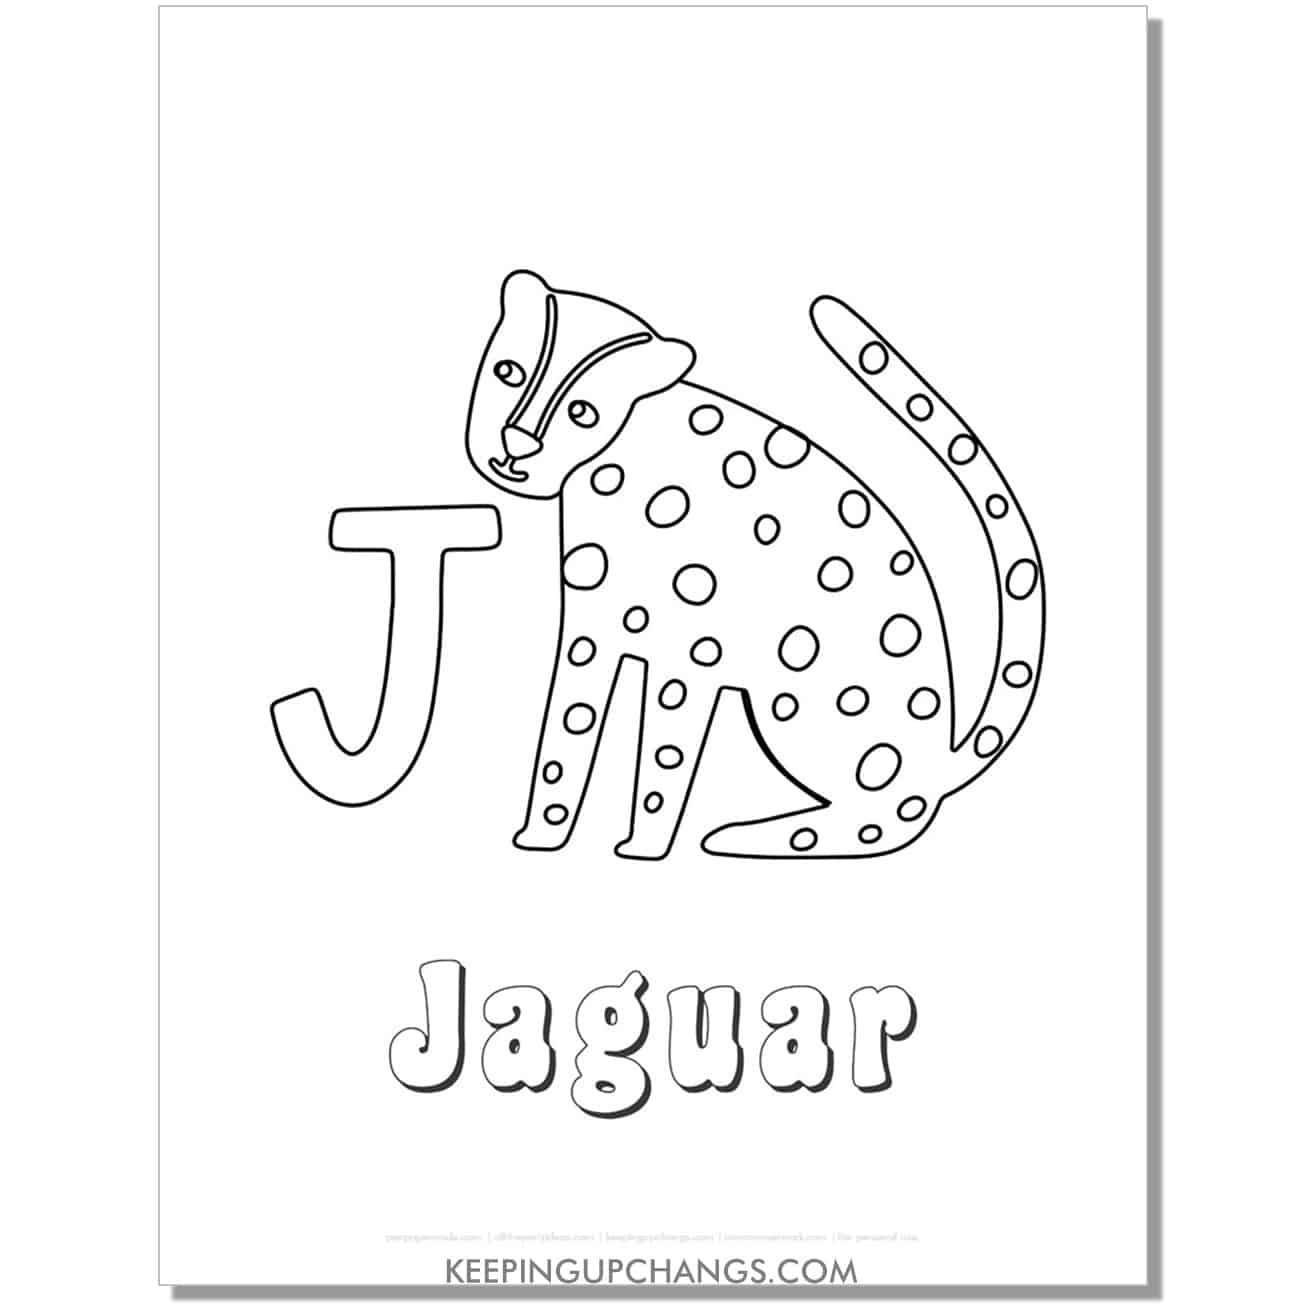 fun abc j coloring page with jaguar hand drawing.